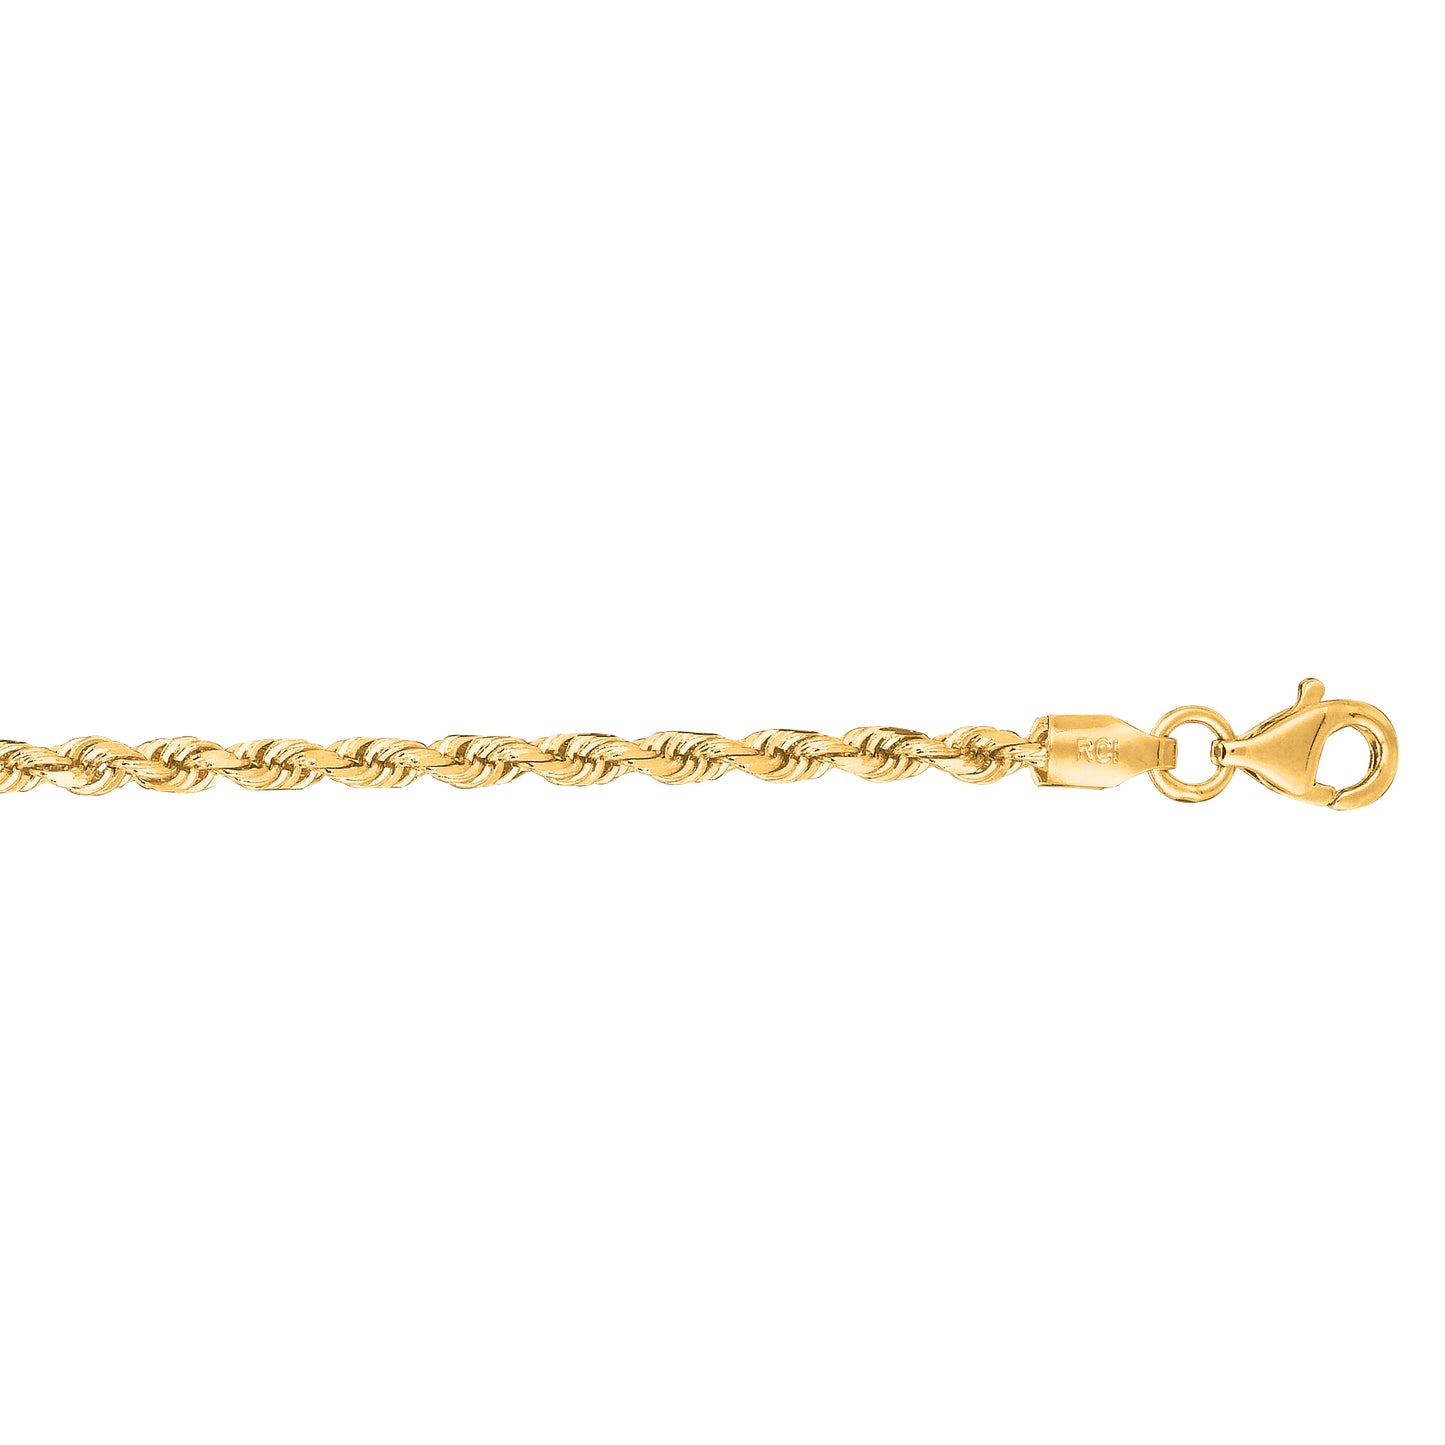 10K Gold 2.5mm Solid Diamond Cut Royal Rope Chain